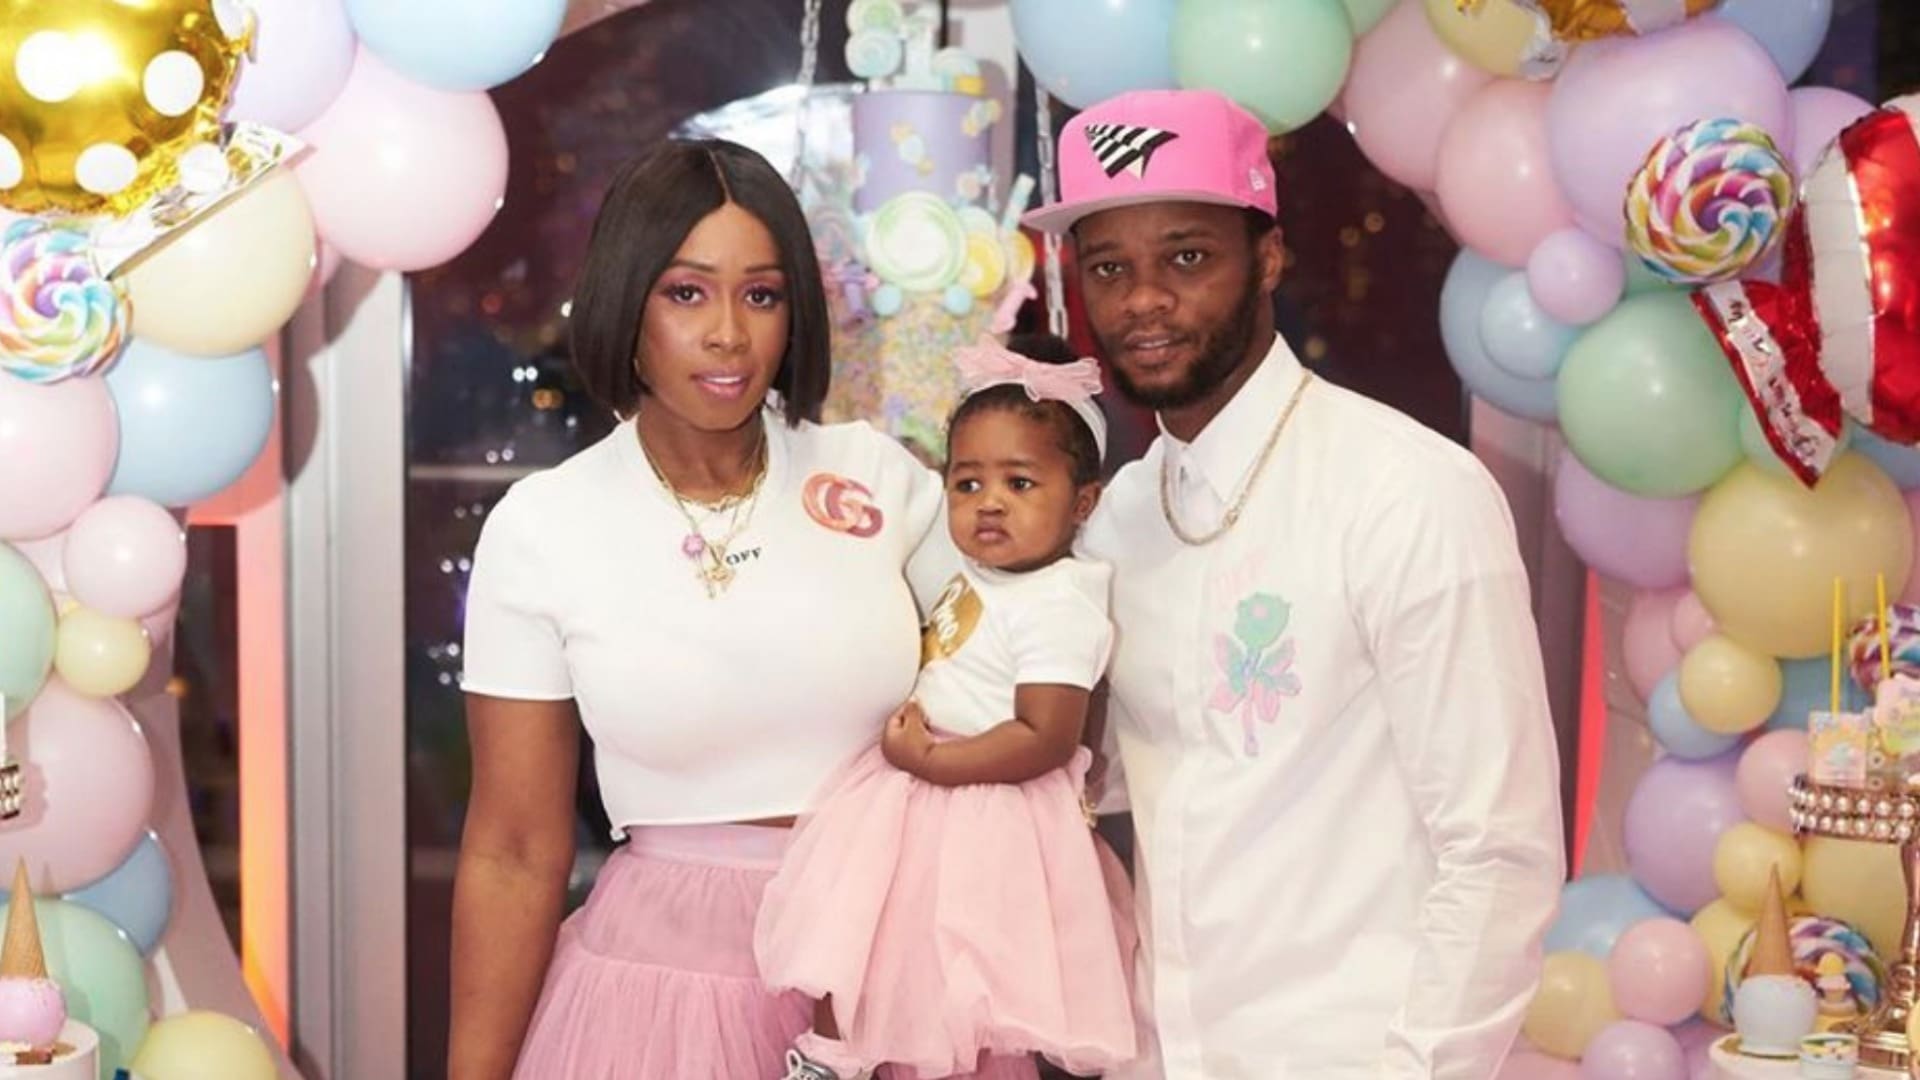 Papoose And Remy Ma's Baby Girl Is Riding Her Car In The Living Room! Check Out The Video